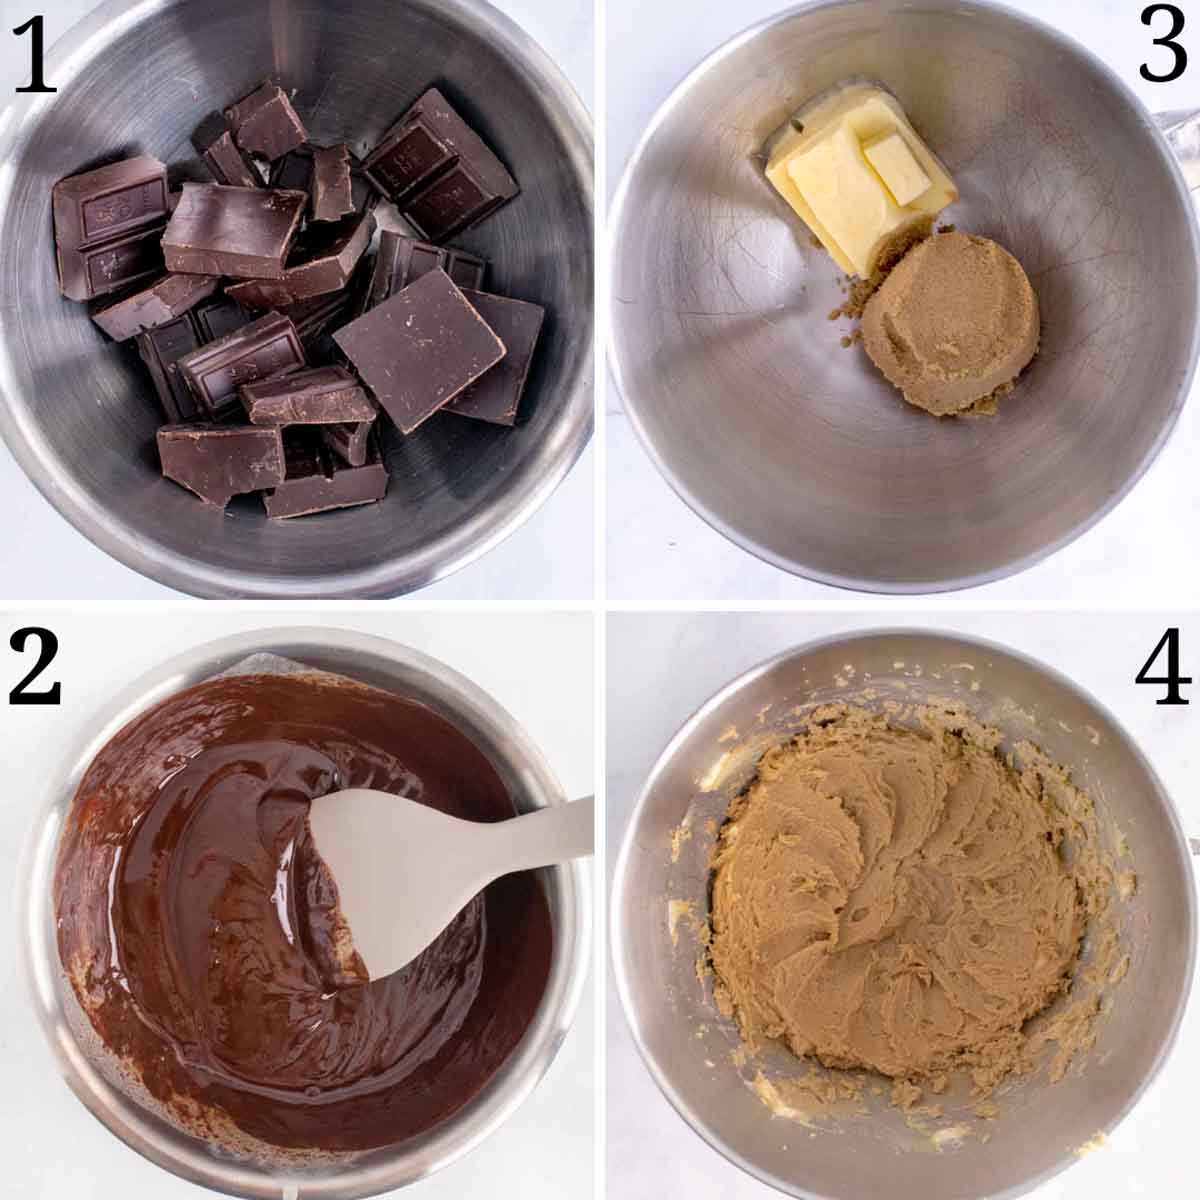 four images showing the first steps in making a chocolate torte